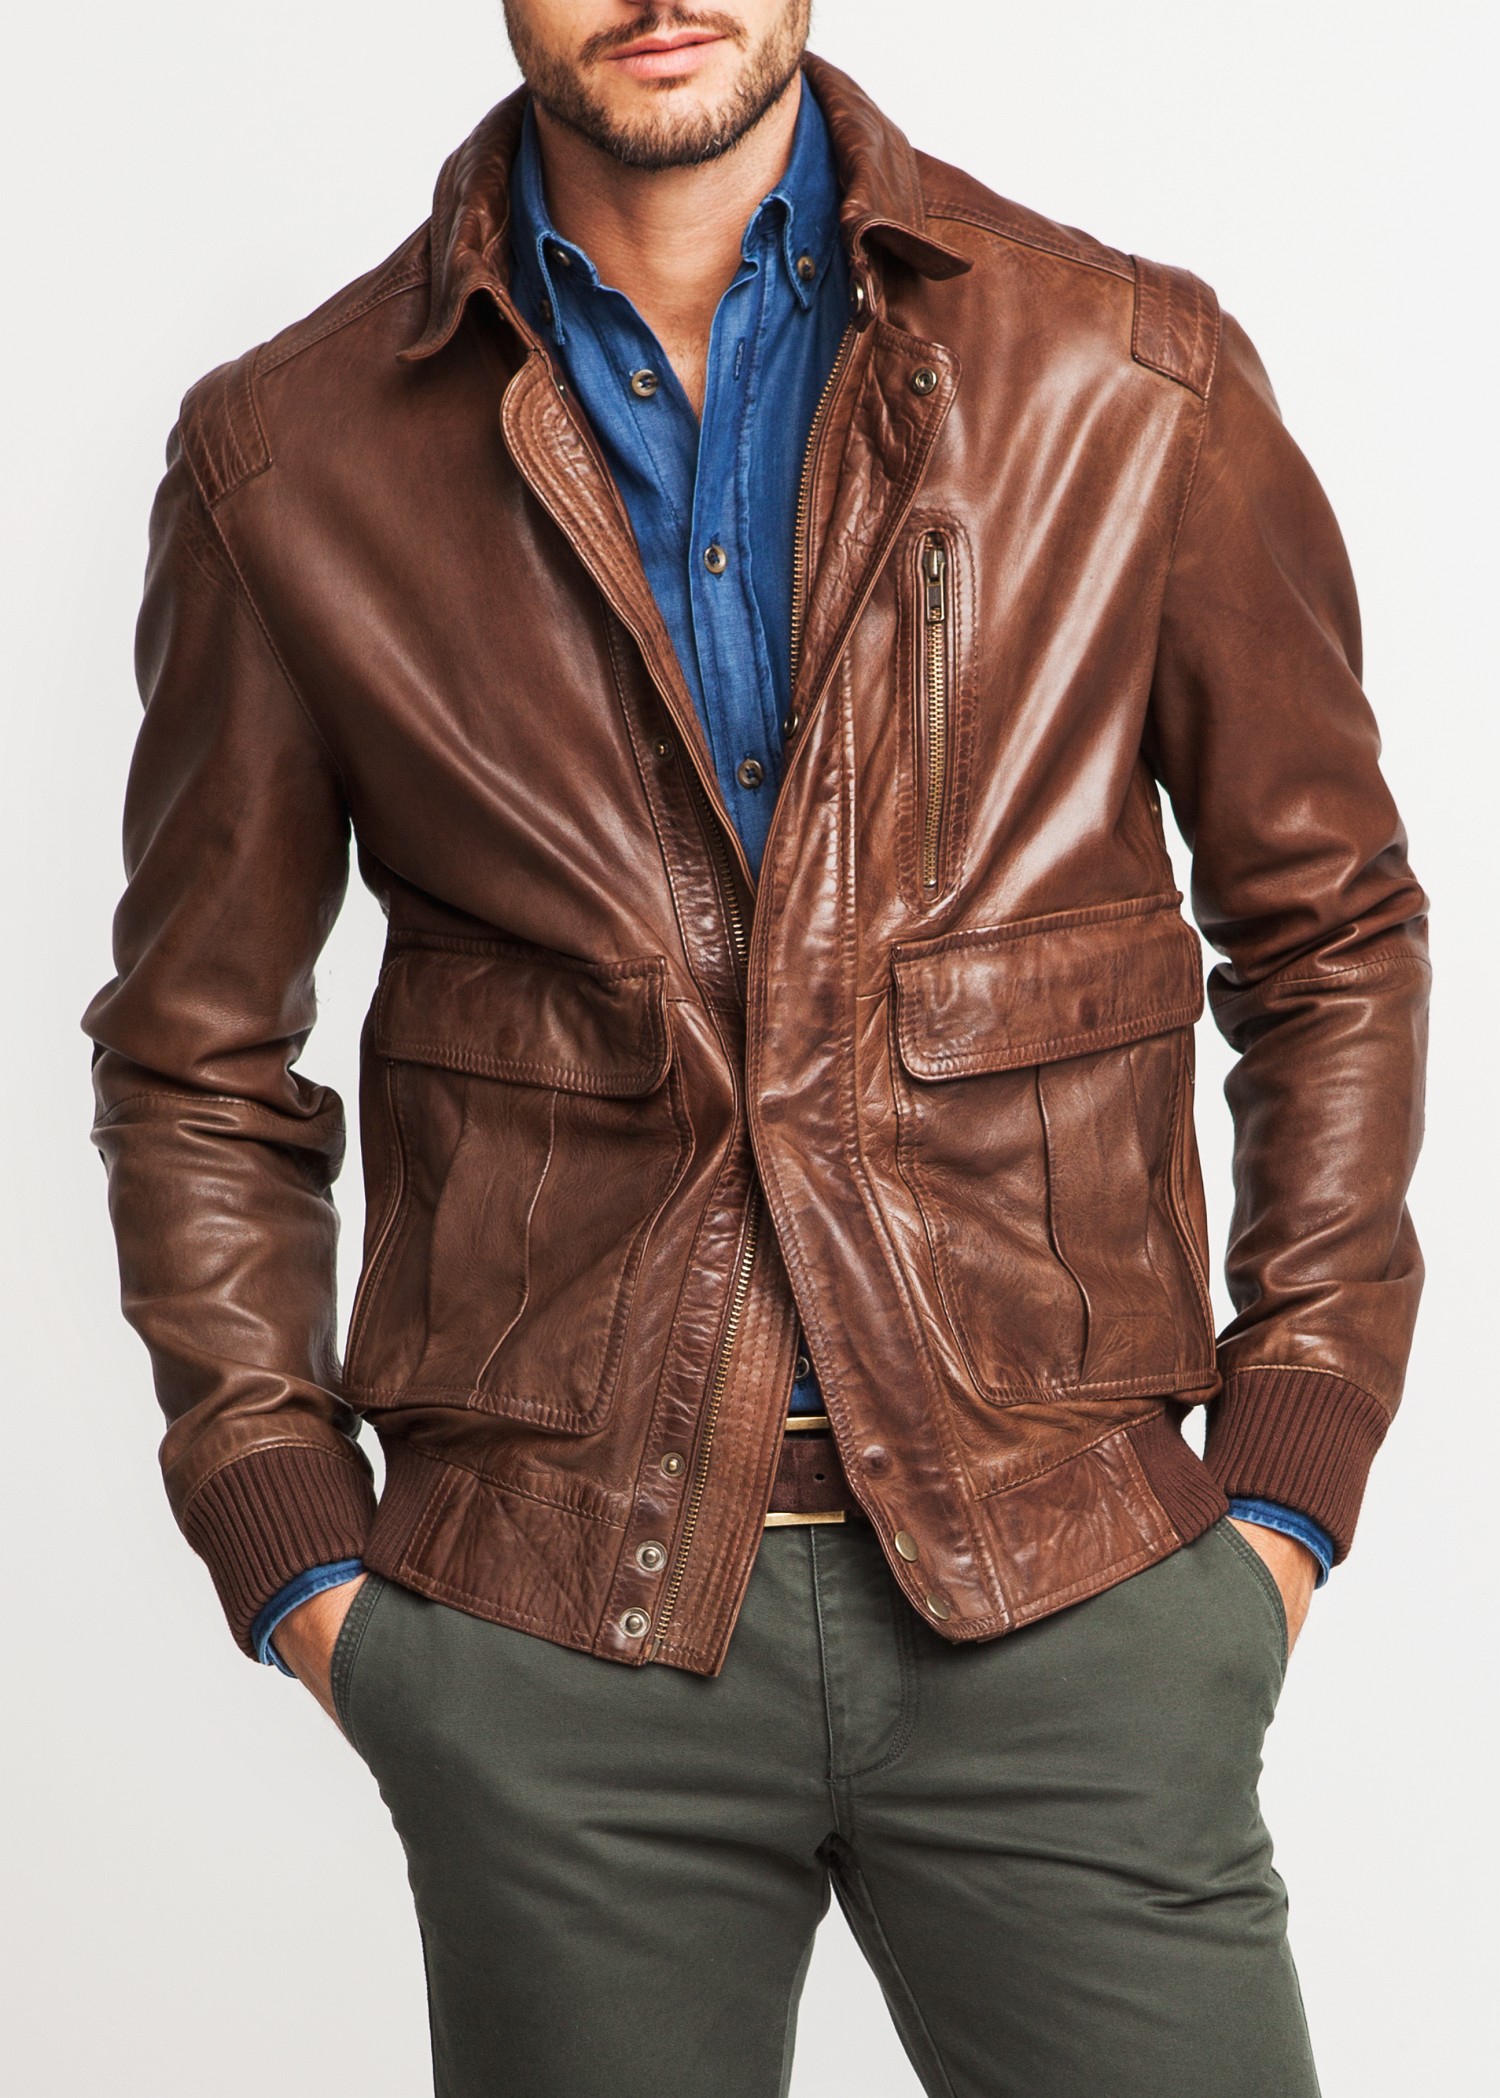 Lyst - Mango Leather Aviator Jacket in Brown for Men